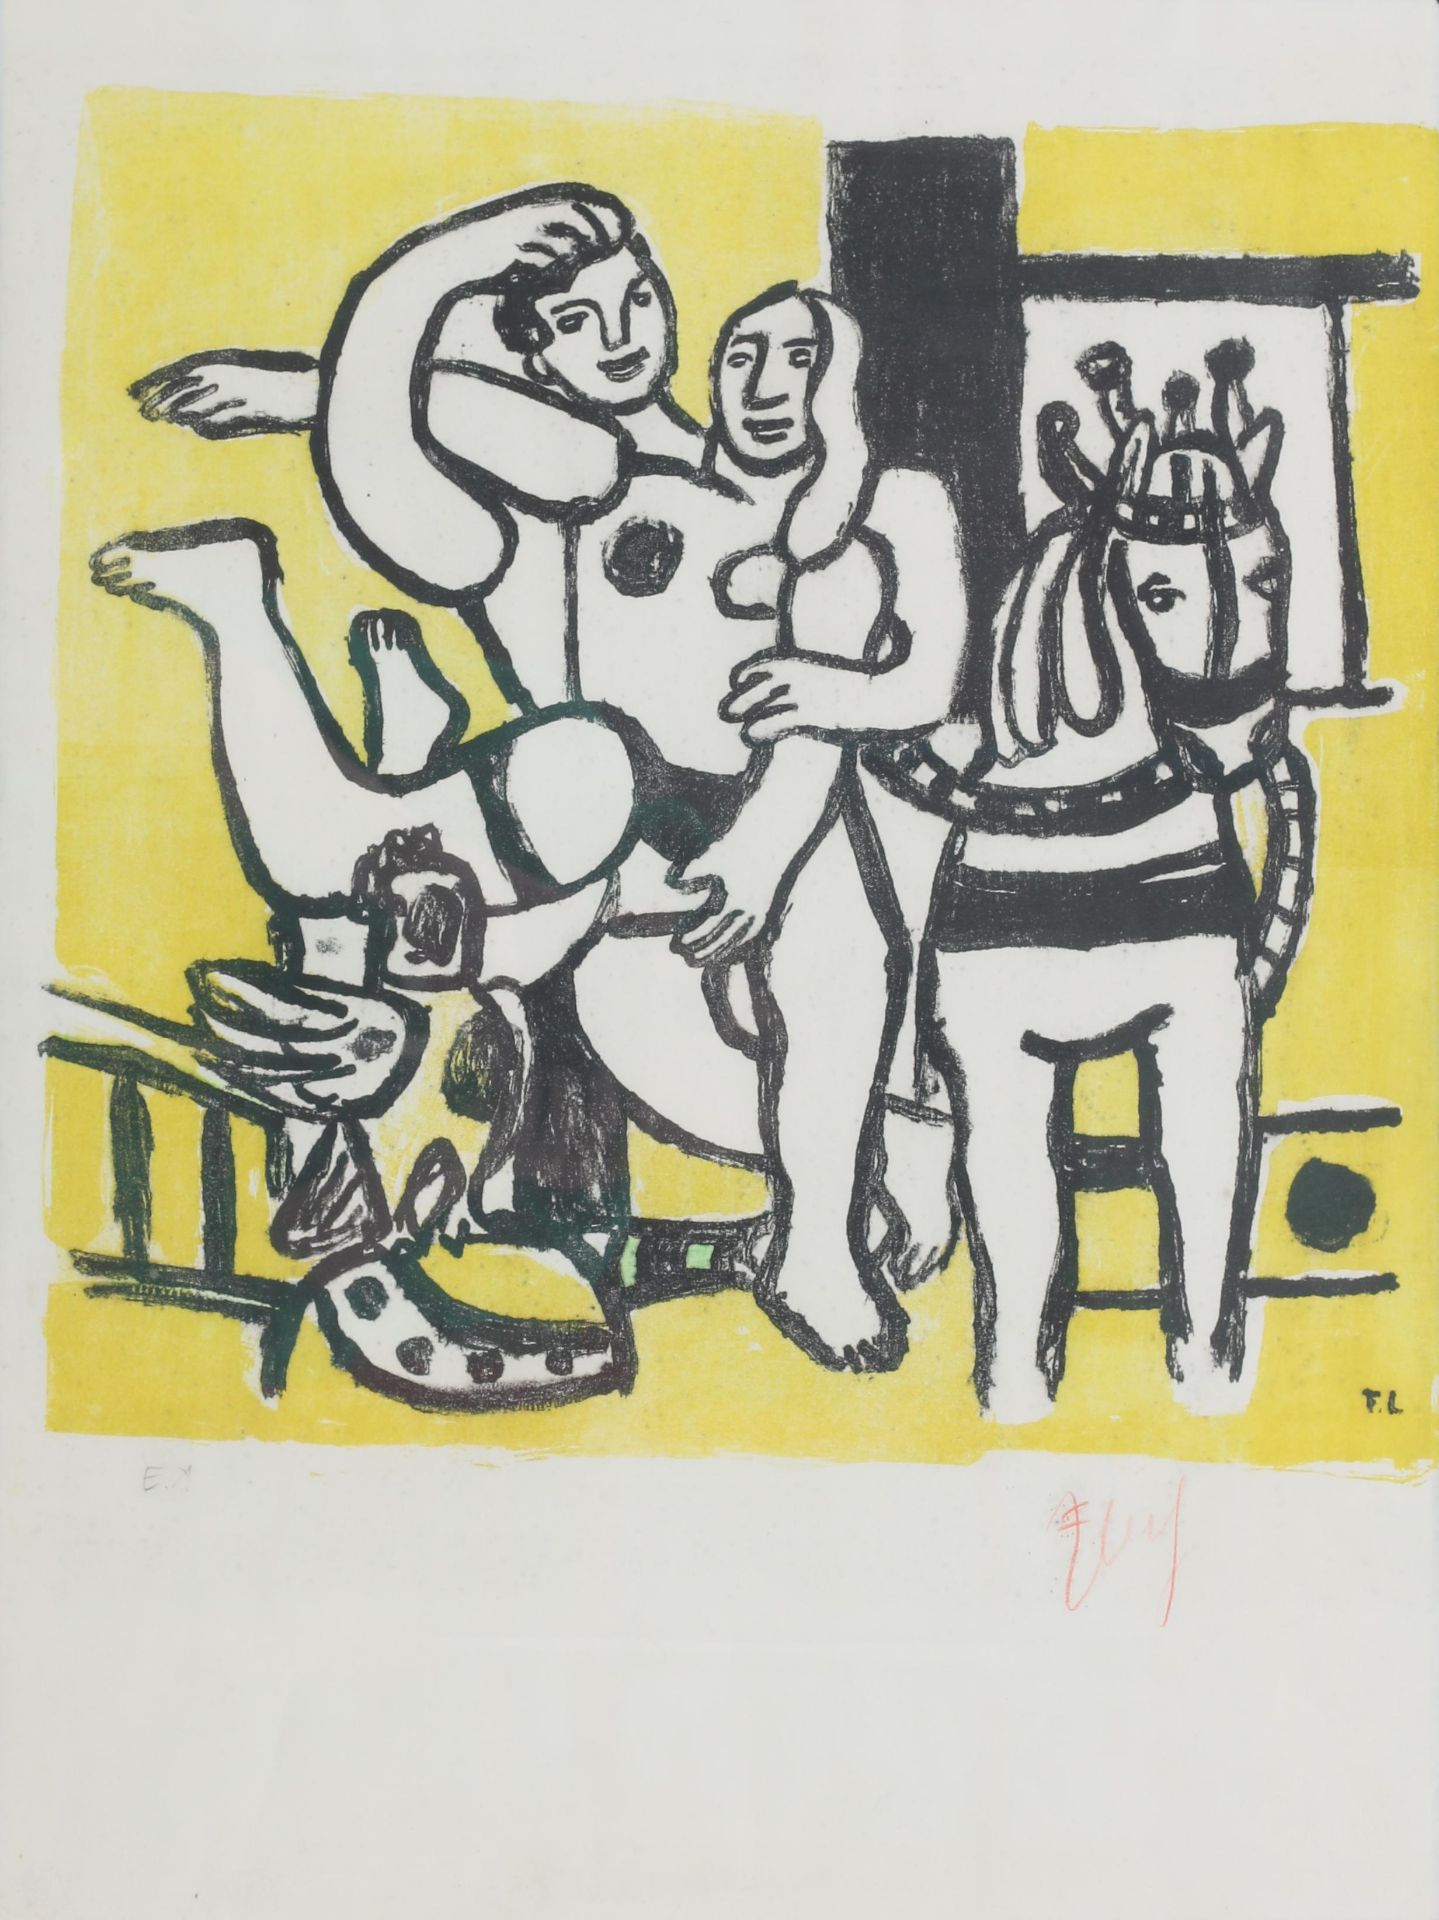 Fernand Léger (1881-1955) Le cirque jaune (ca. 1950). Signed in the plate and in red pencil lower